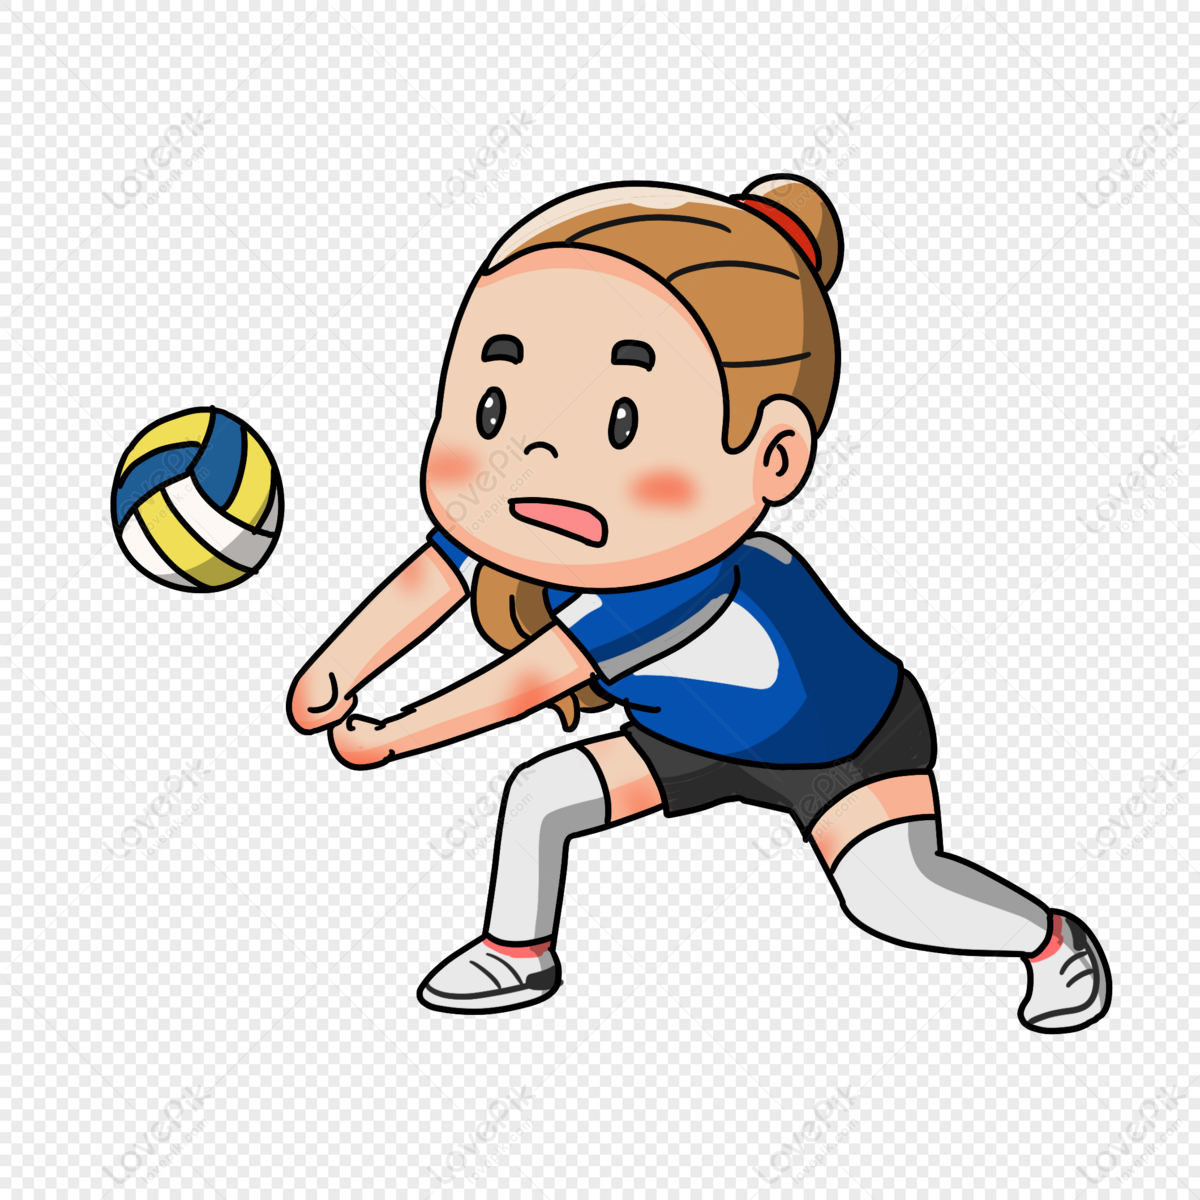 Volleyball PNG Image And Clipart Image For Free Download - Lovepik |  401394348